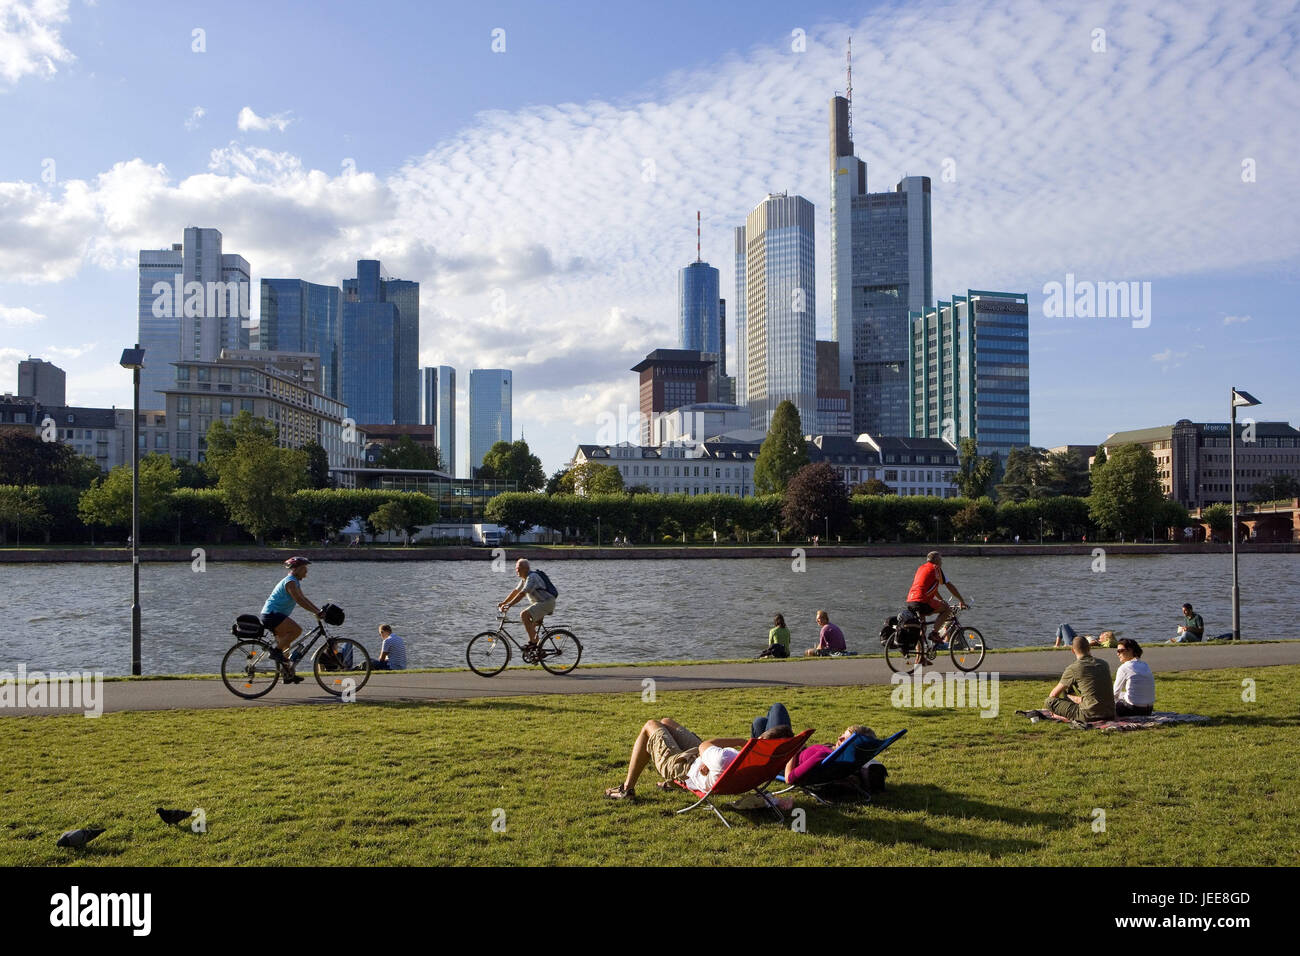 Germany, Hessen, Frankfurt on the Main, town view, riverside, cycle track, meadow, person, détente, metropolis, town, houses, high rises, office buildings, high-rise office blocks, river, the Main, shore, way, person, leisure time, rest, cyclist, financial metropolis, Stock Photo